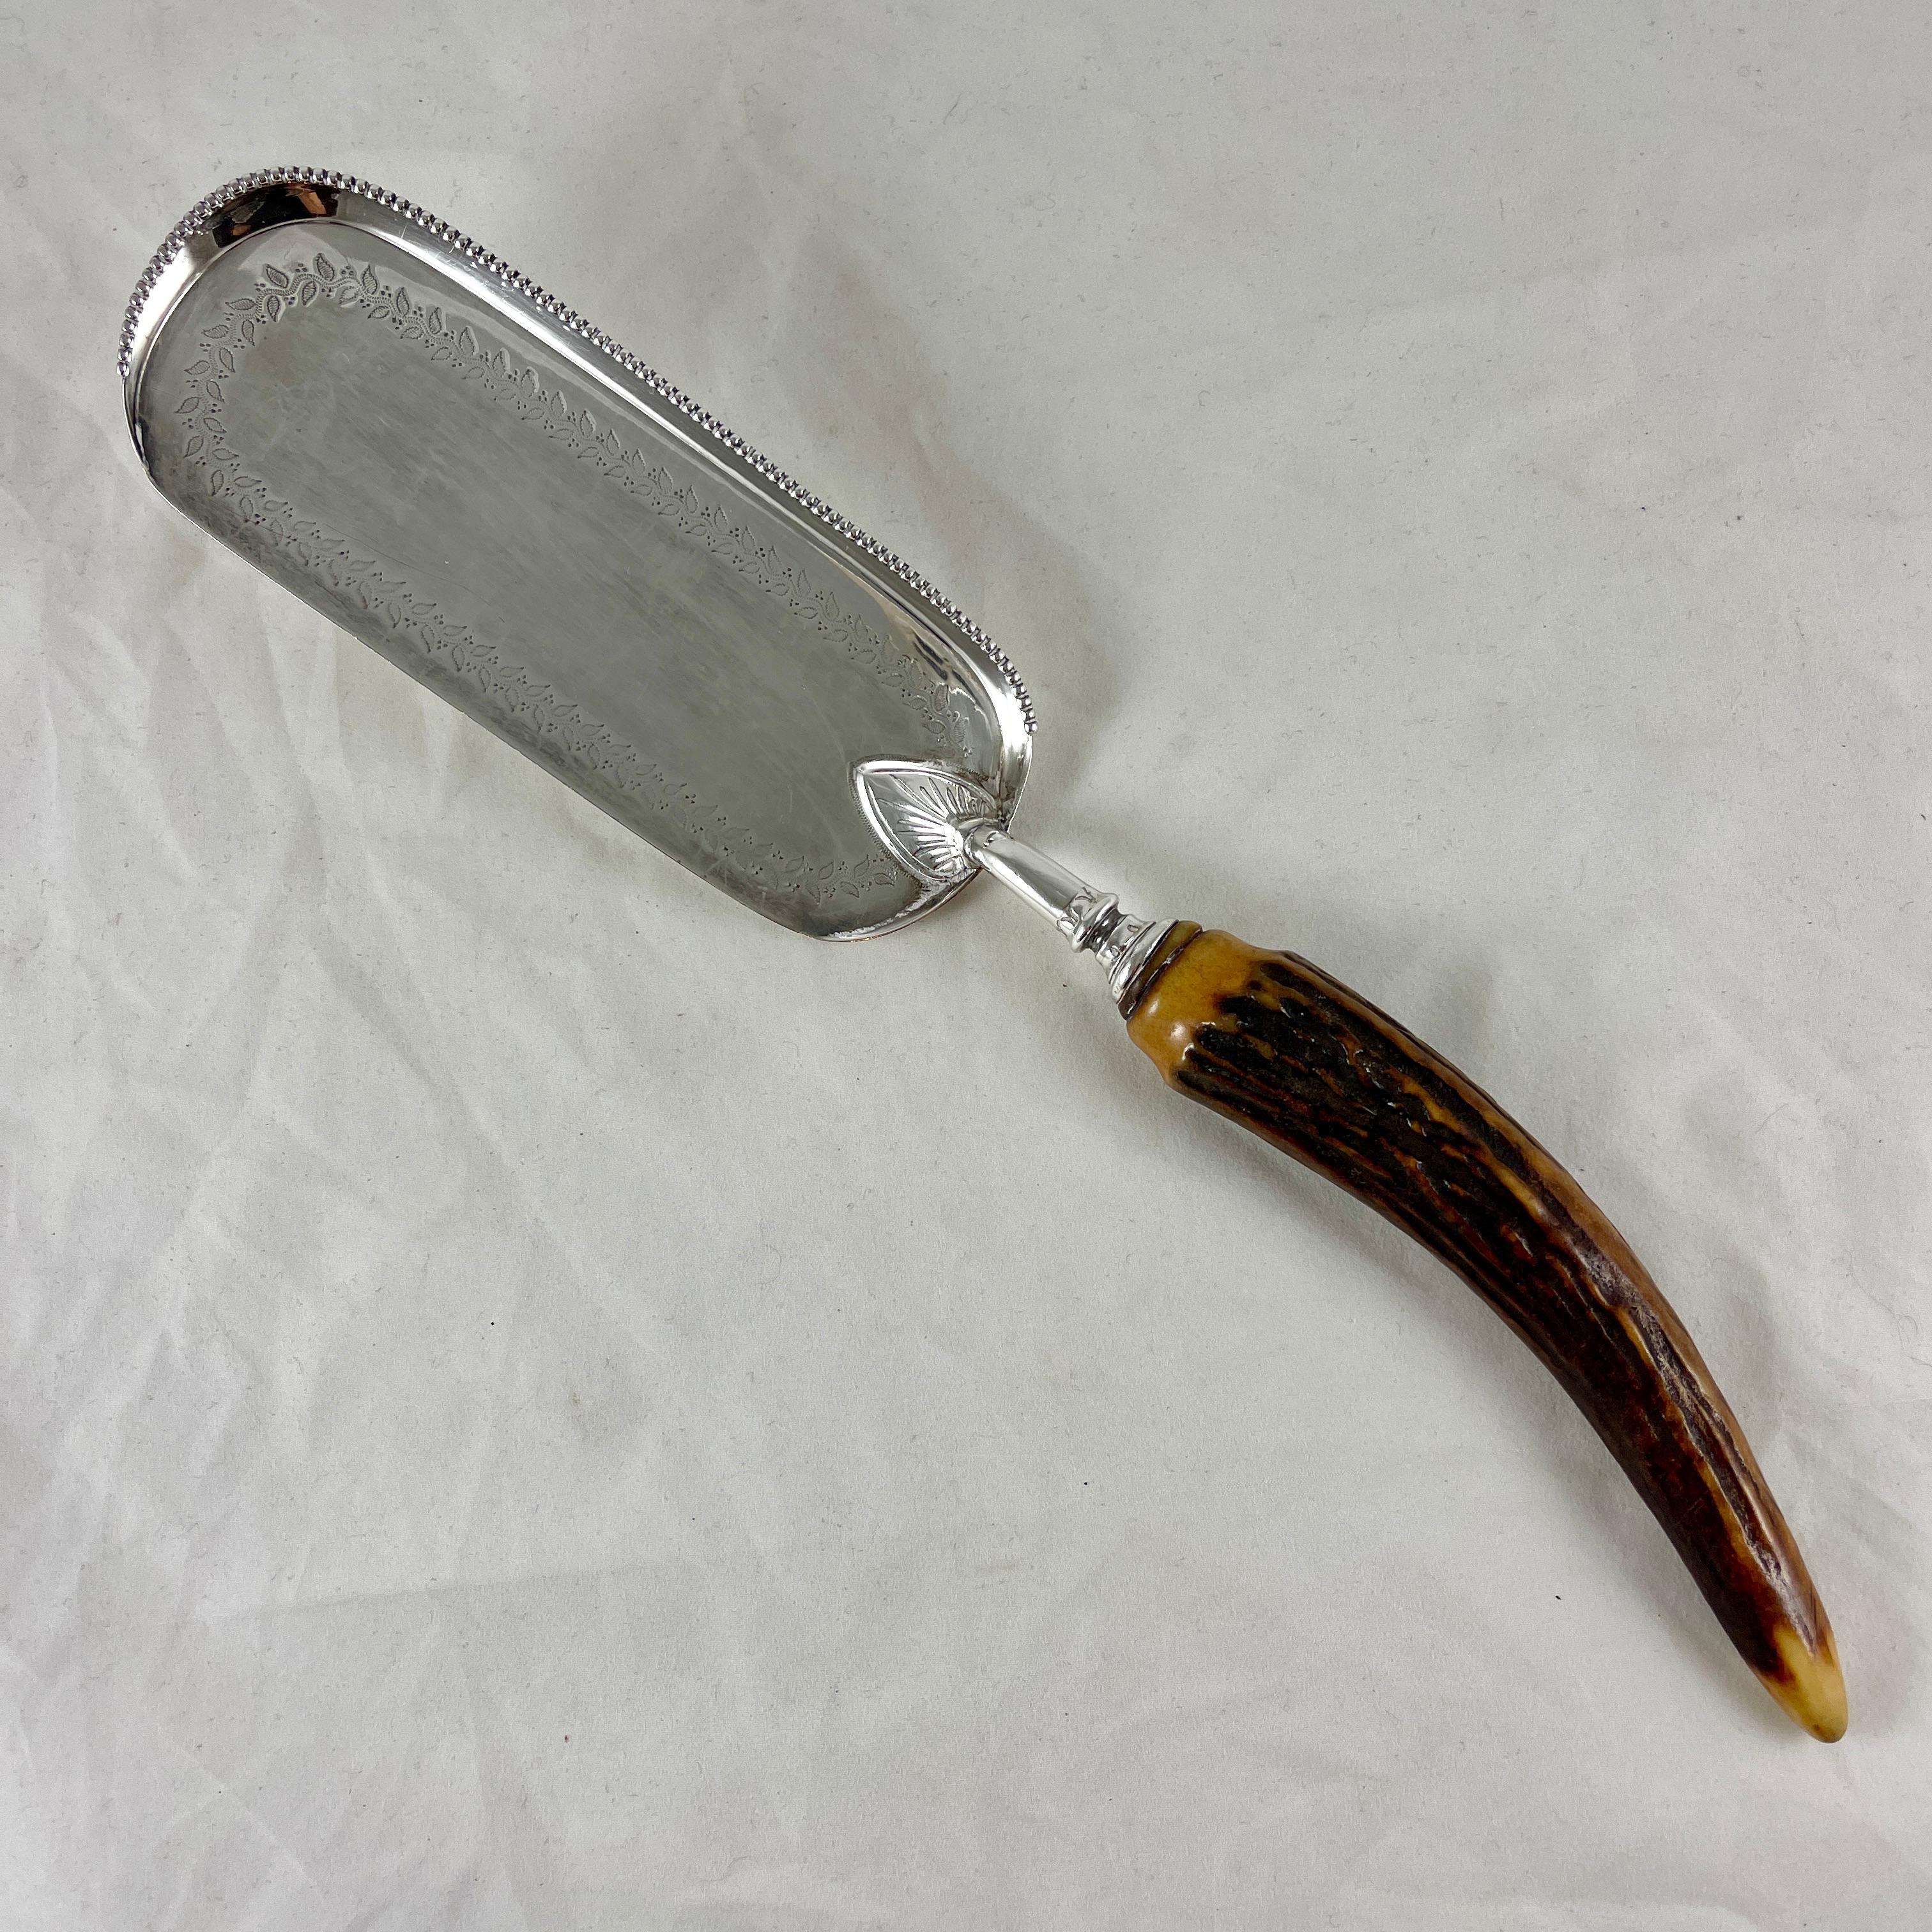 Atkin Brothers Sheffield England Stag Horn Handle & Silver Plate Table Crumber For Sale 2